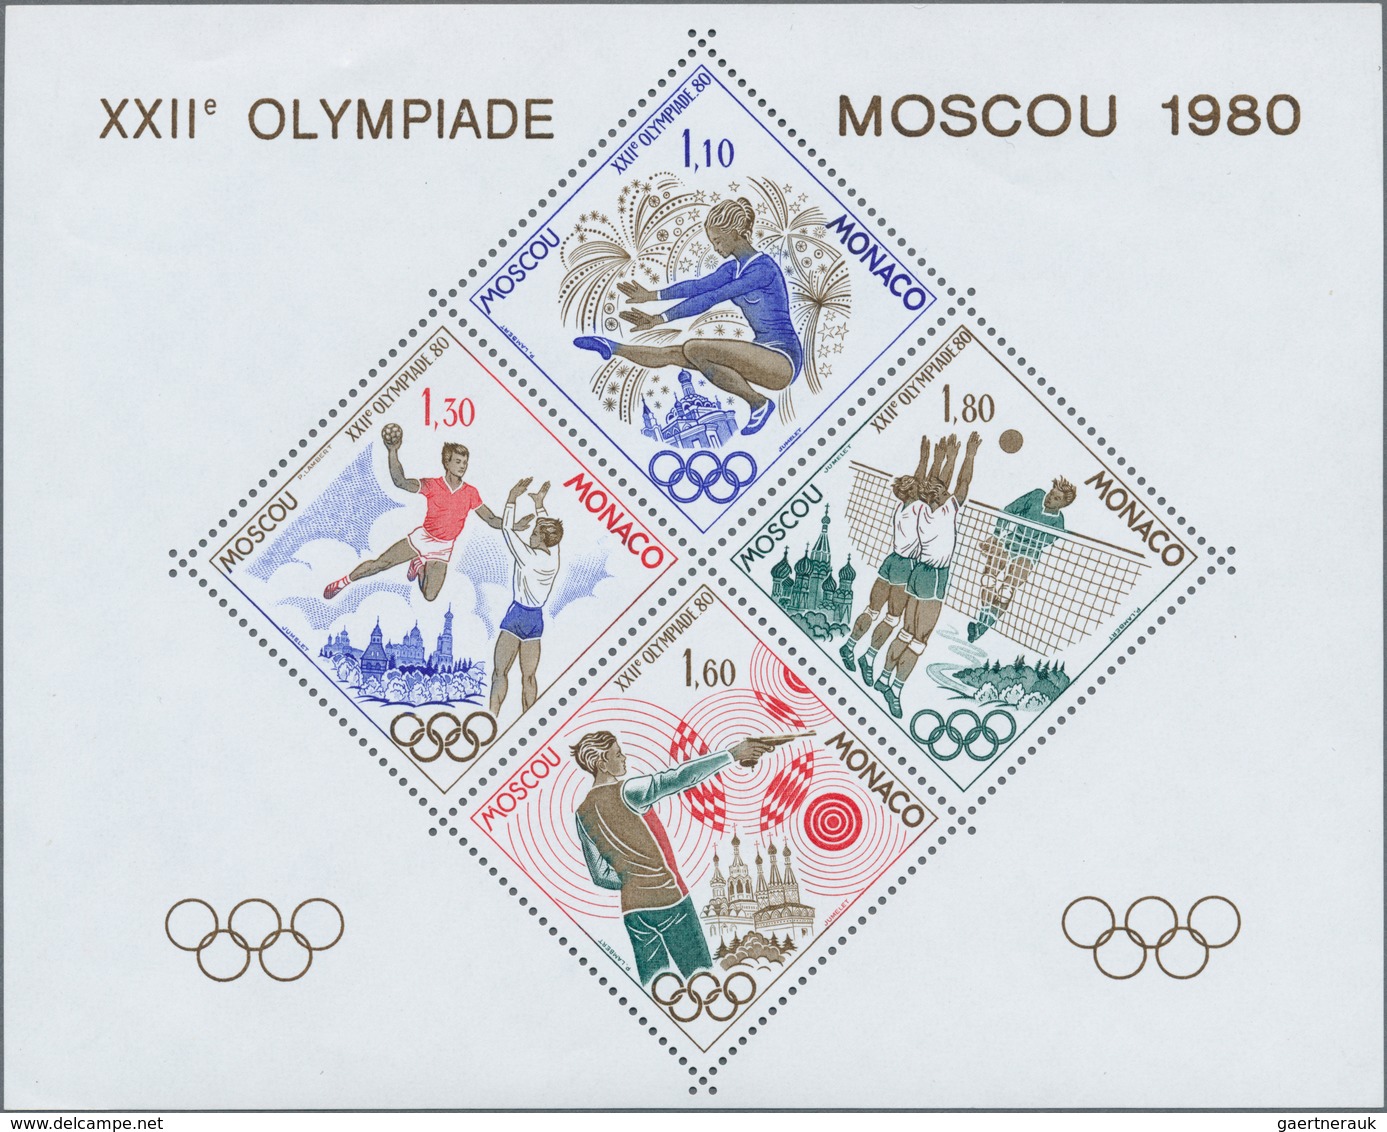 Monaco: 1980, Olympic Games Moscow, Bloc Speciaux, Six Copies Unmounted Mint. Maury BS11 (6), 1.140, - Nuevos